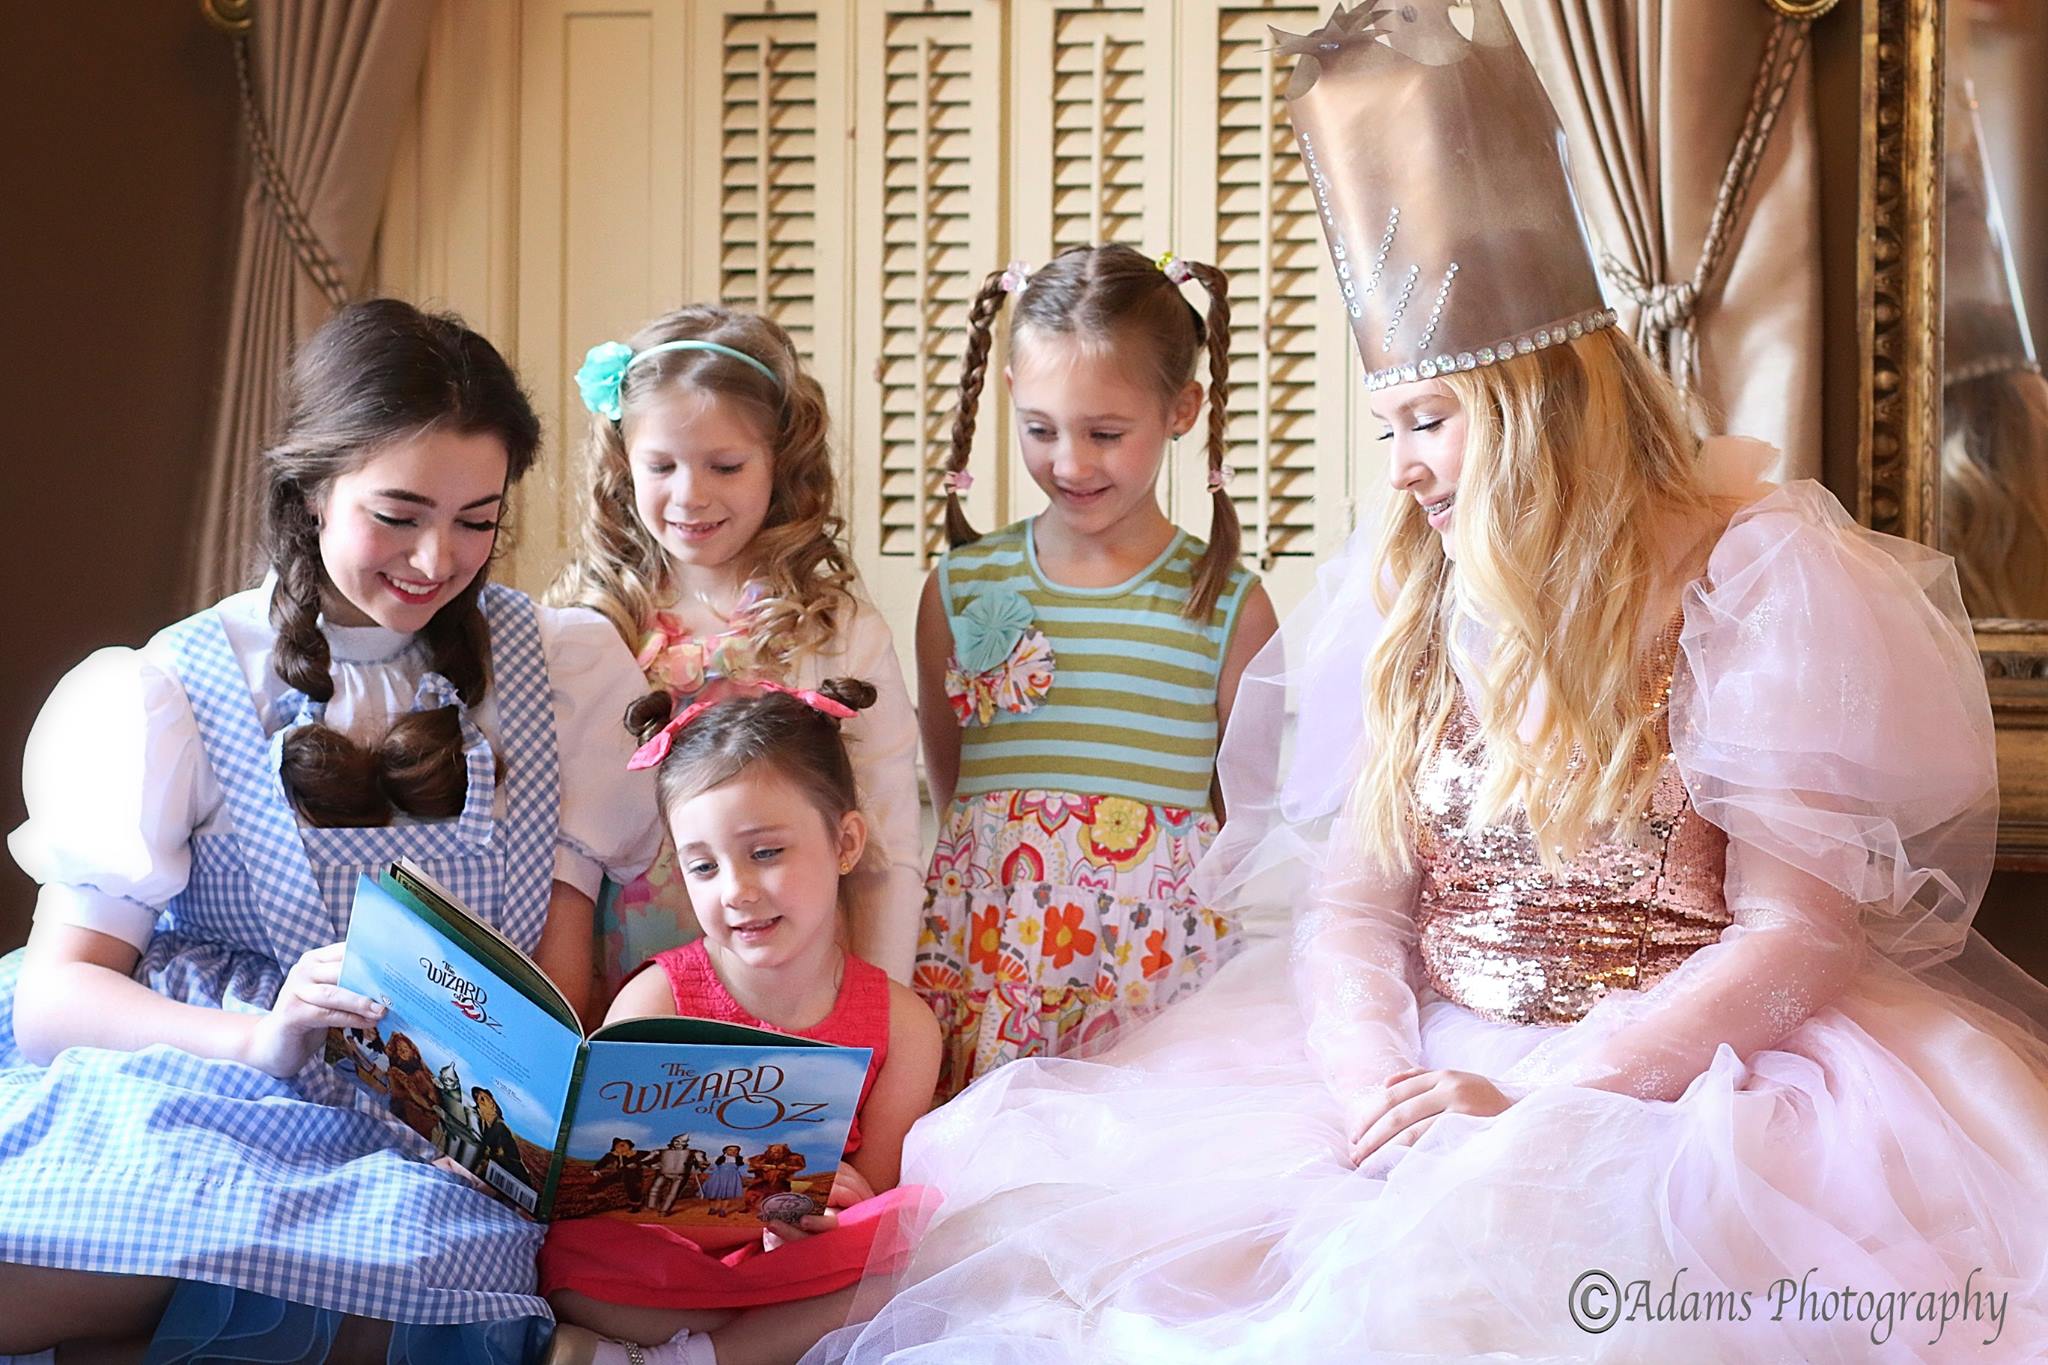 Storytime with Dorothy and Glinda